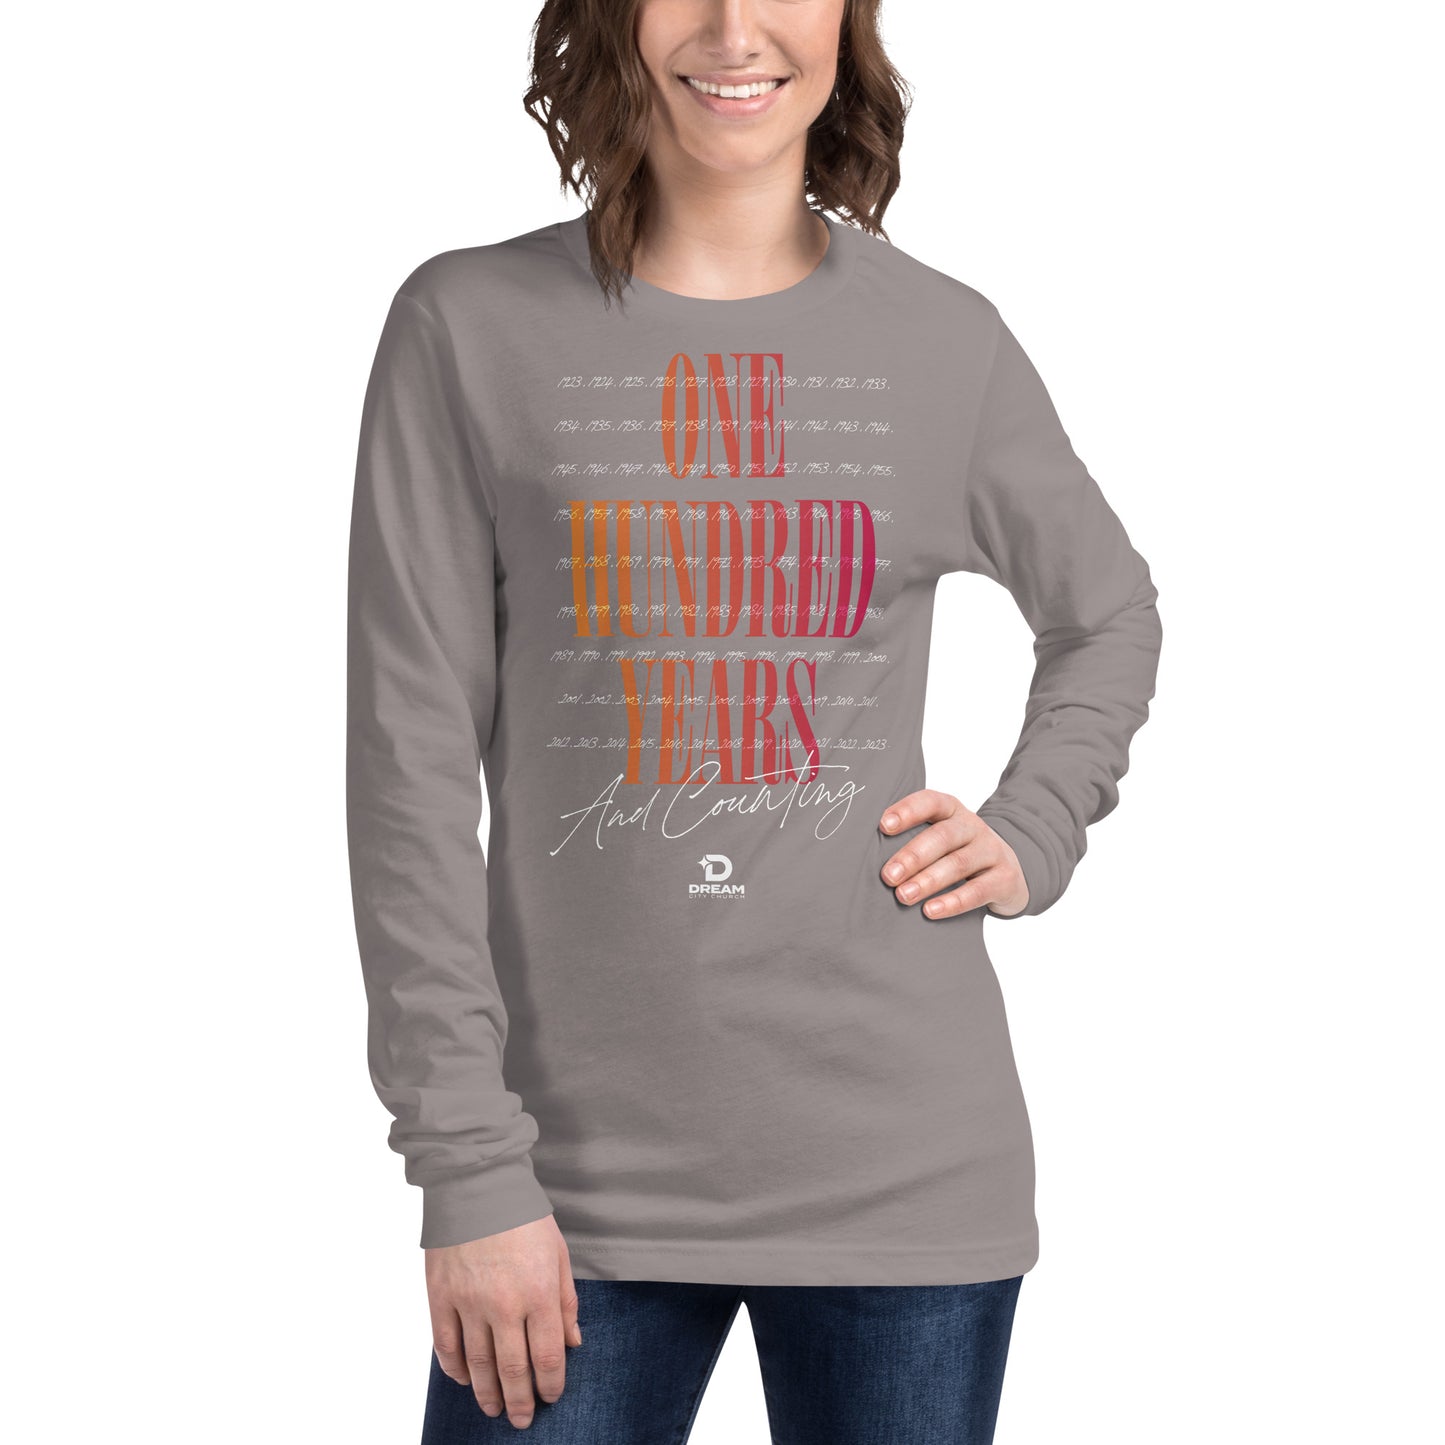 One Hundred Years and Counting - Long Sleeve Tee